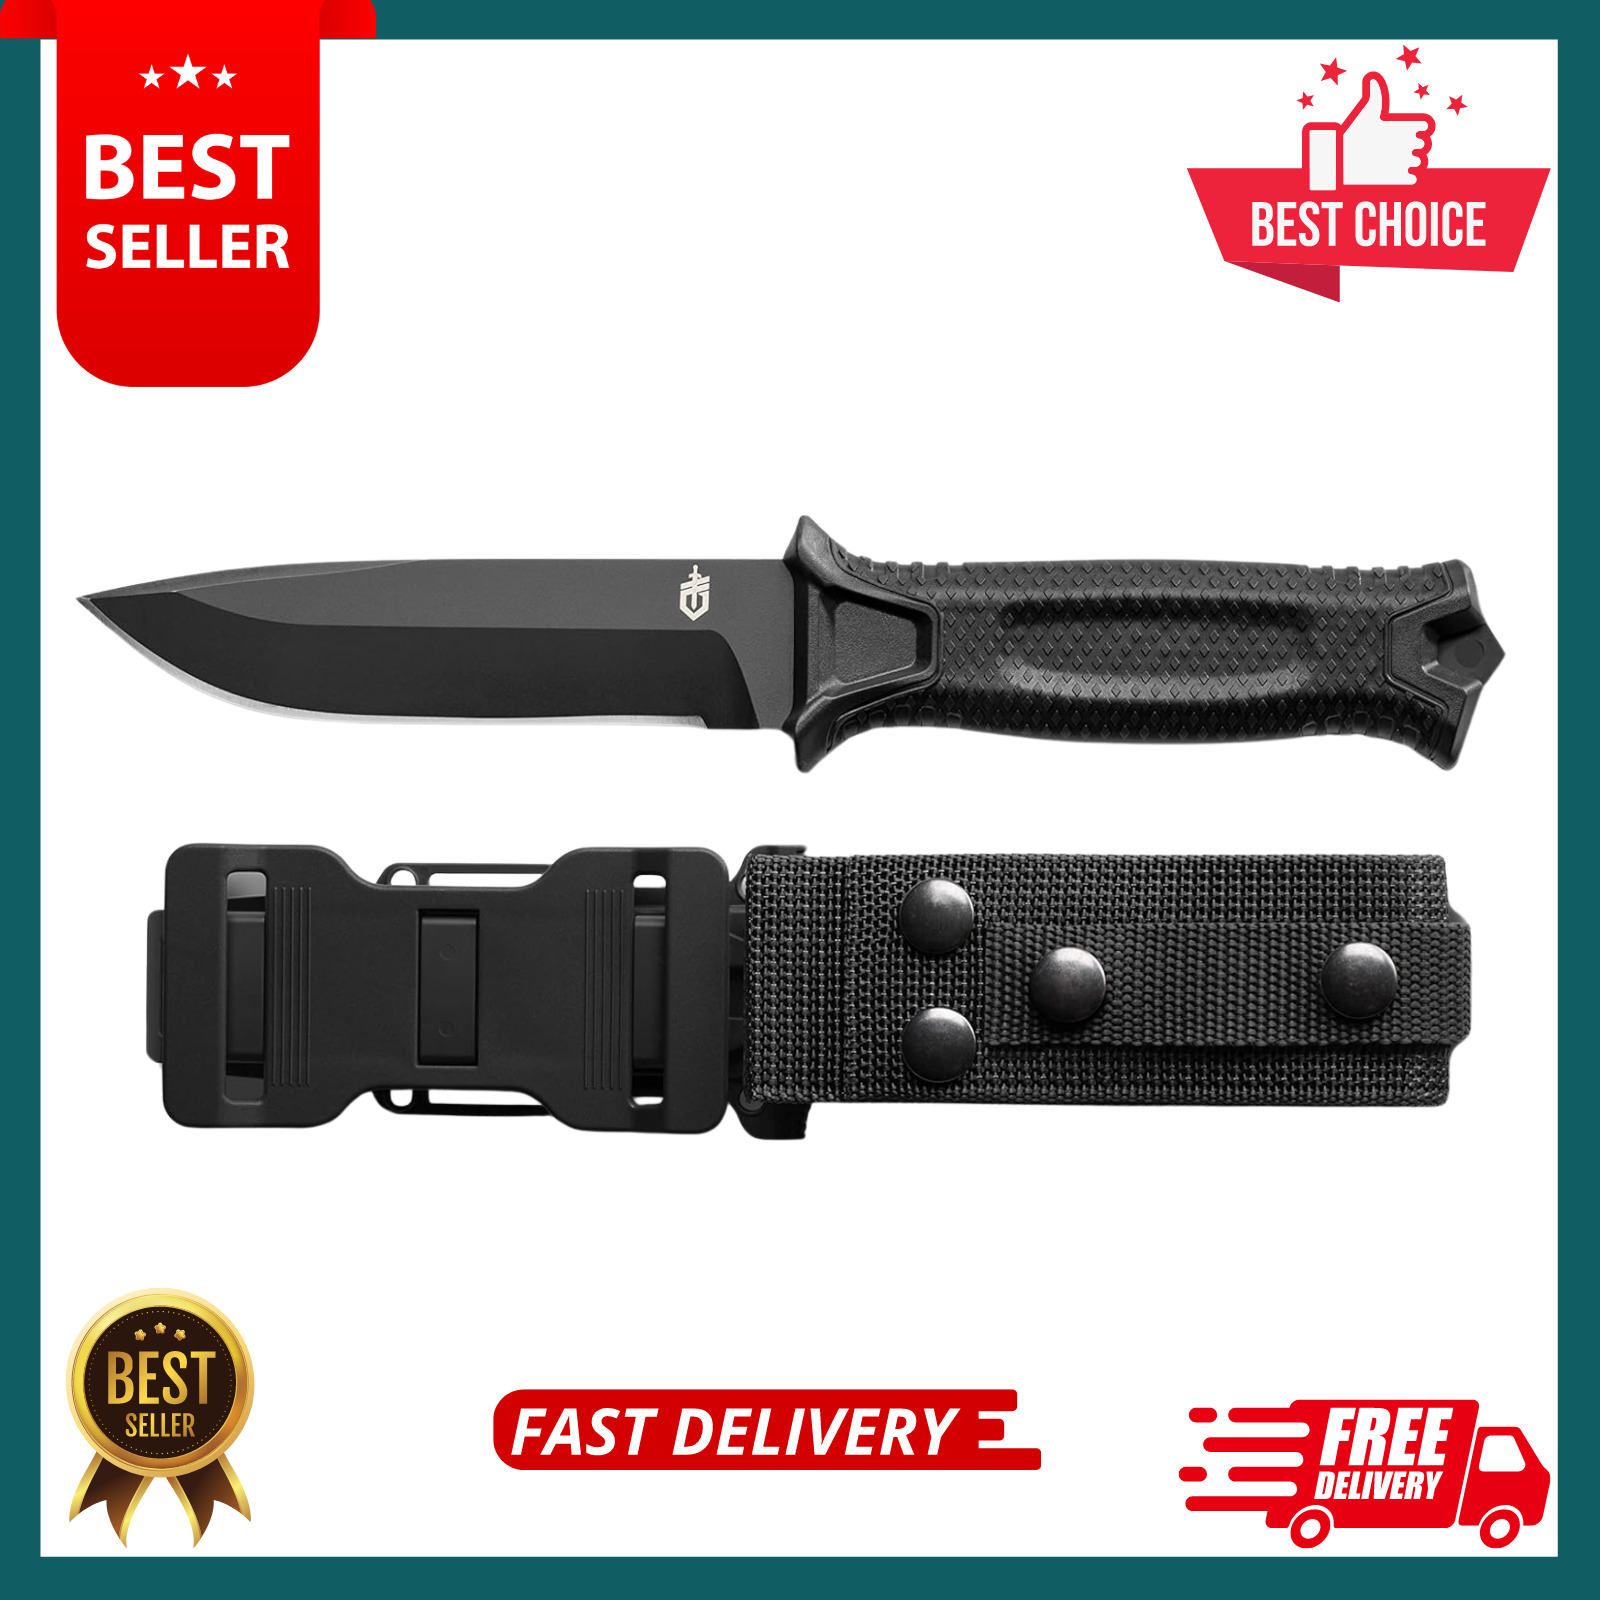 Gerber Gear Strongarm - Fixed Blade Tactical Knife for Survival Gear - Black